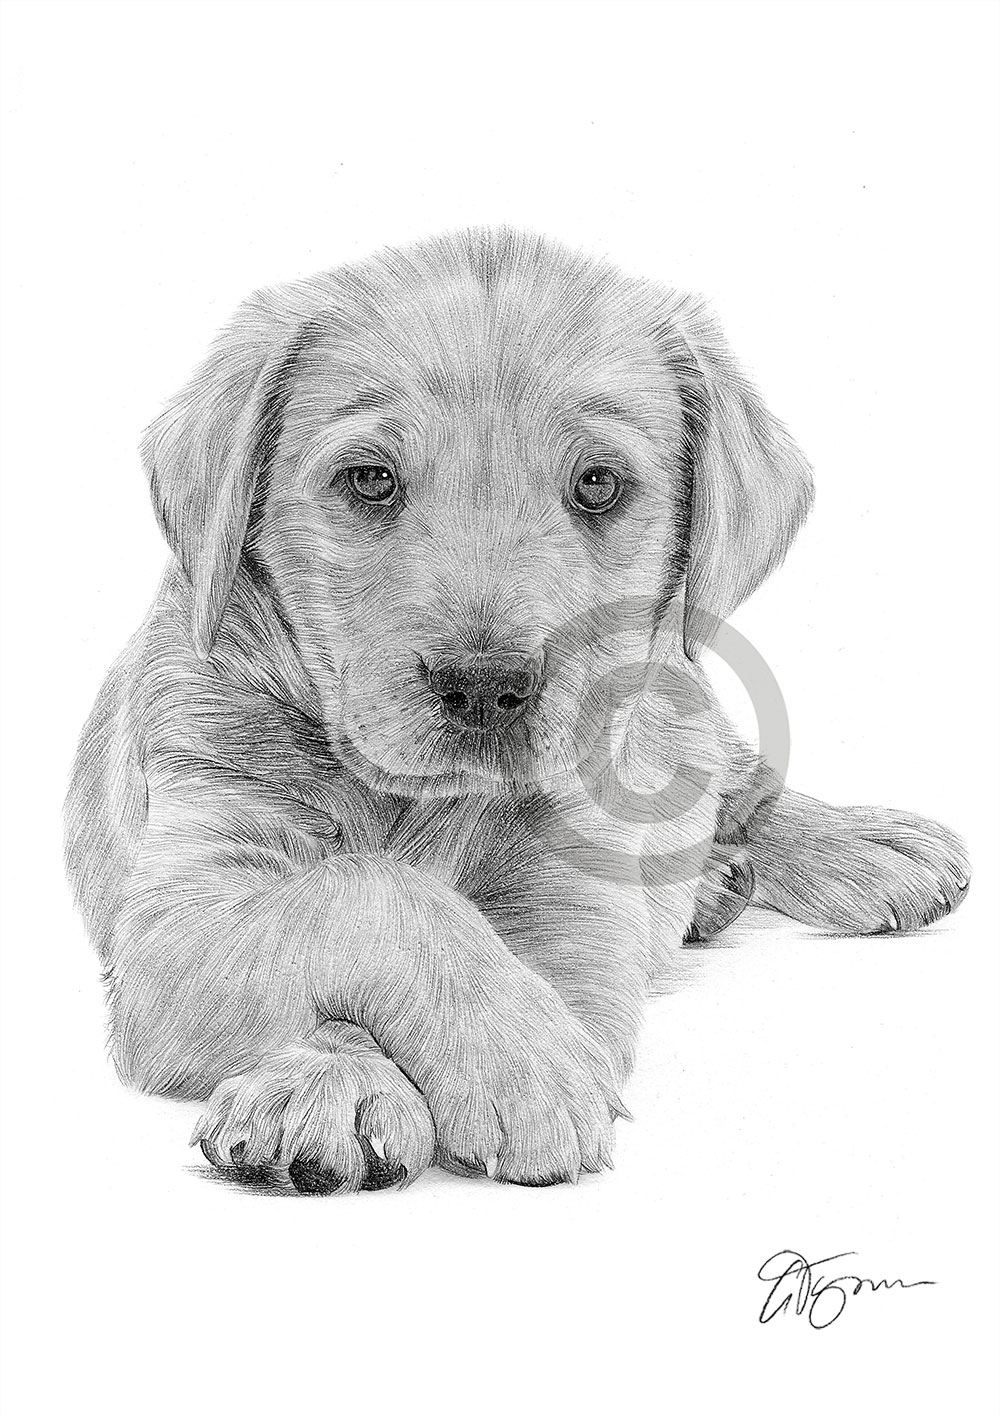 Pencil drawing of a young Labrador Retriever puppy by artist Gary Tymon